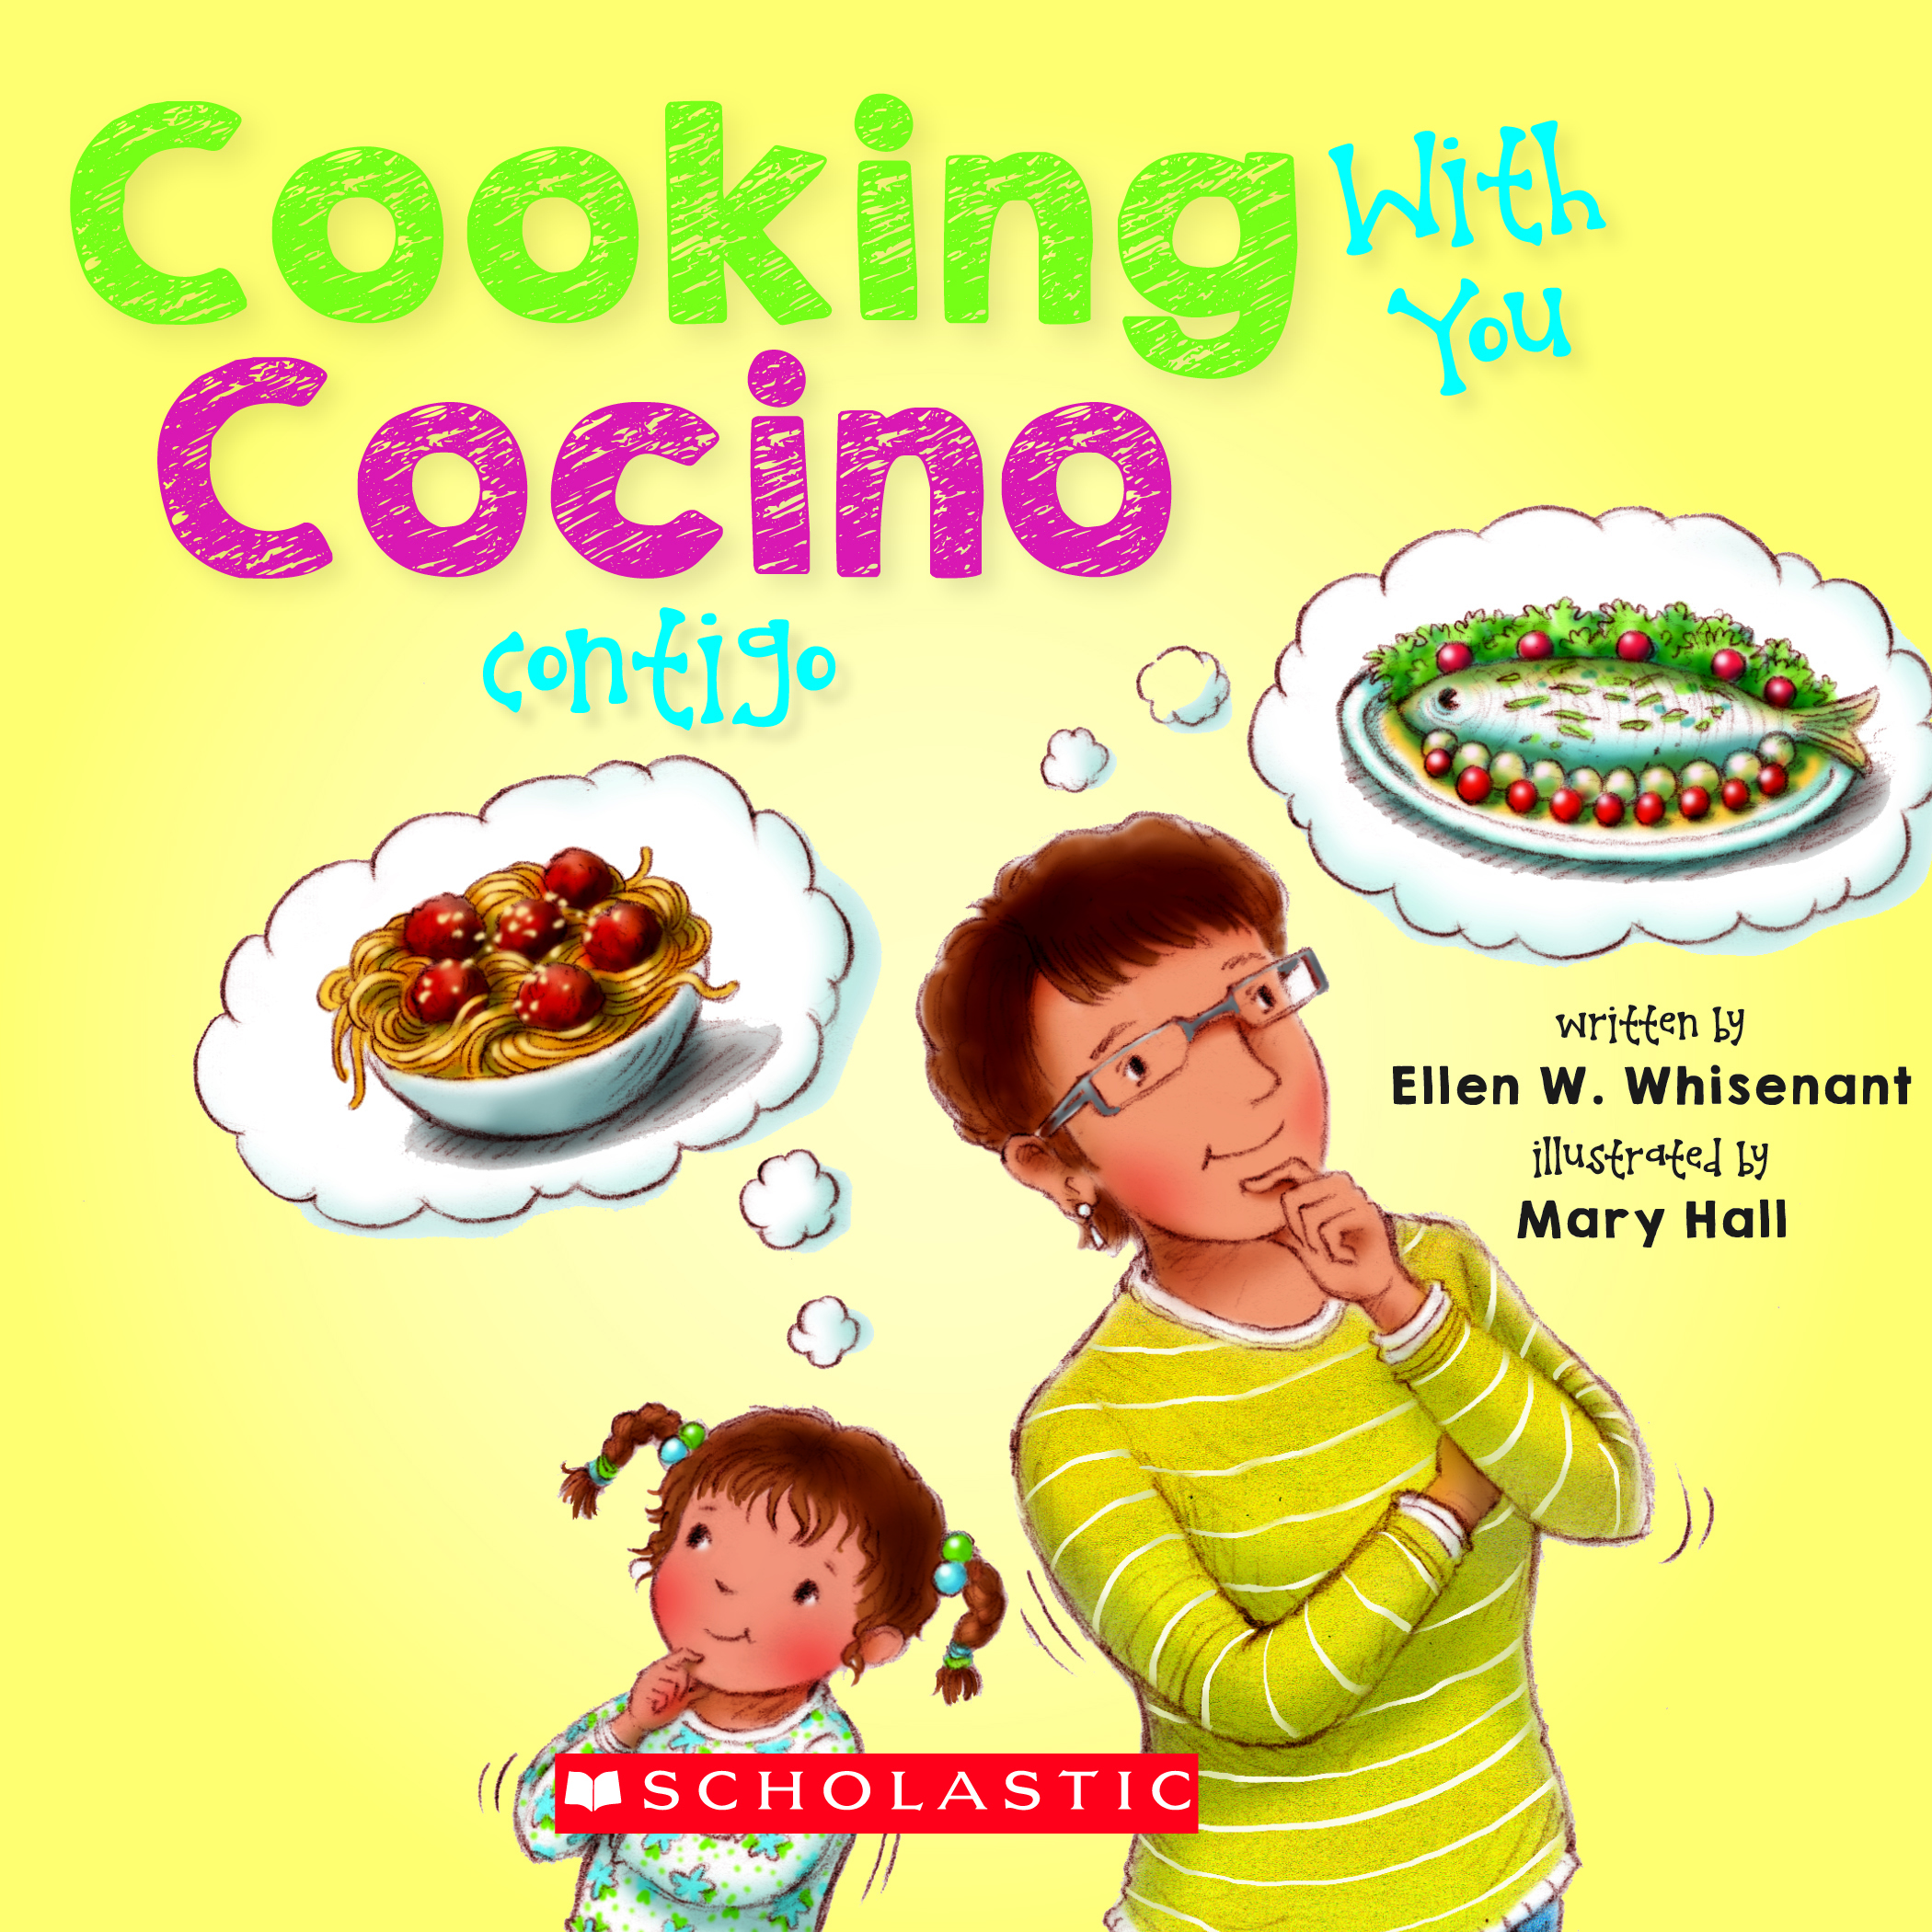 Cooking with you